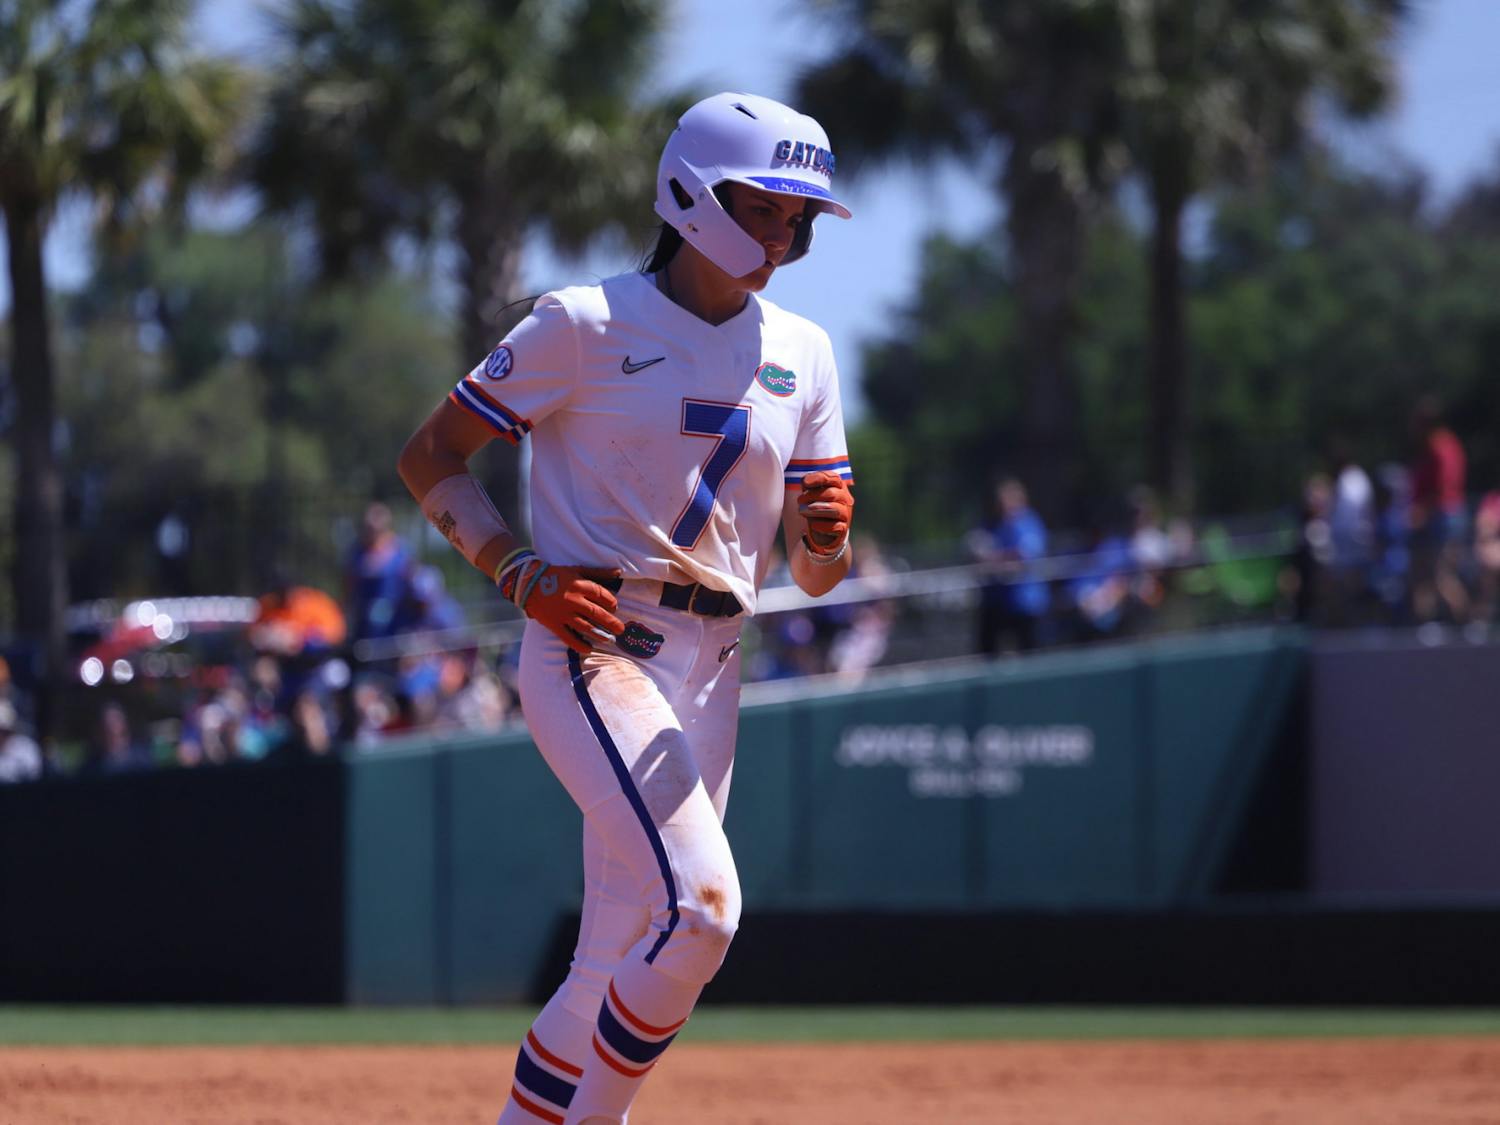 Sophomore Avery Goelz and the No. 6 Florida Gators avoided a sweep against No. 15 Tennessee